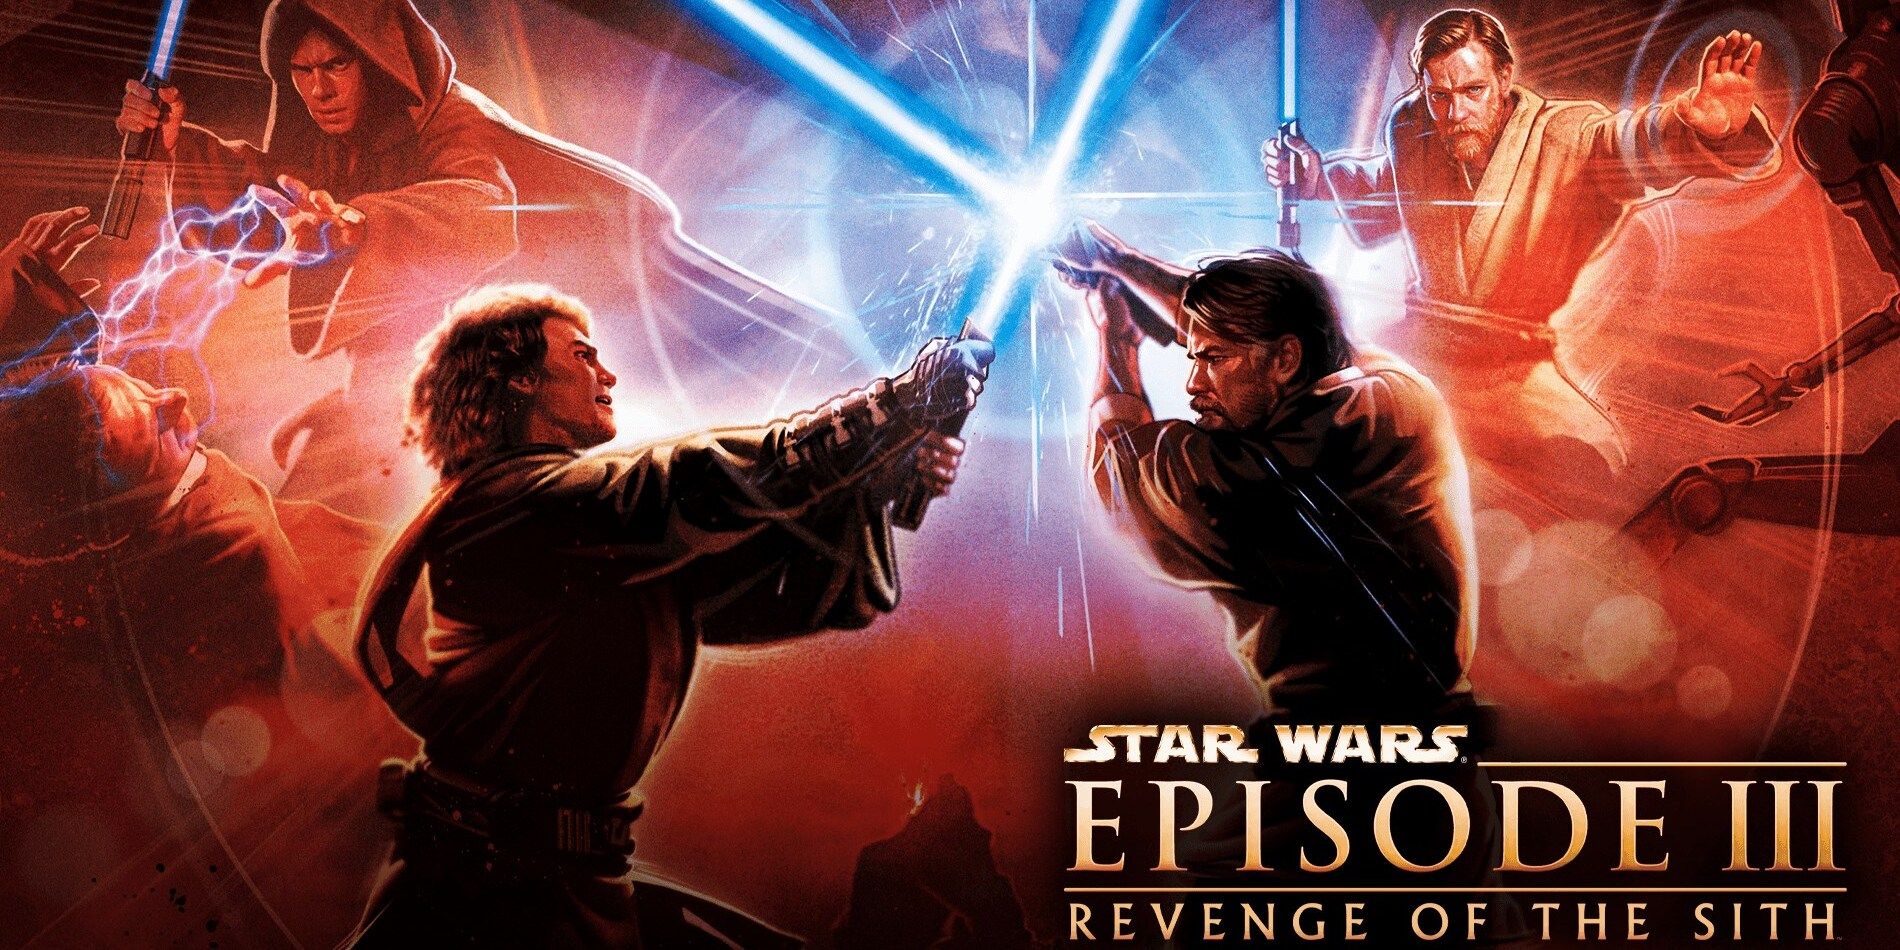 Kenobi and Skywalker clash in a duel on the cover art for Revenge of the Sith game